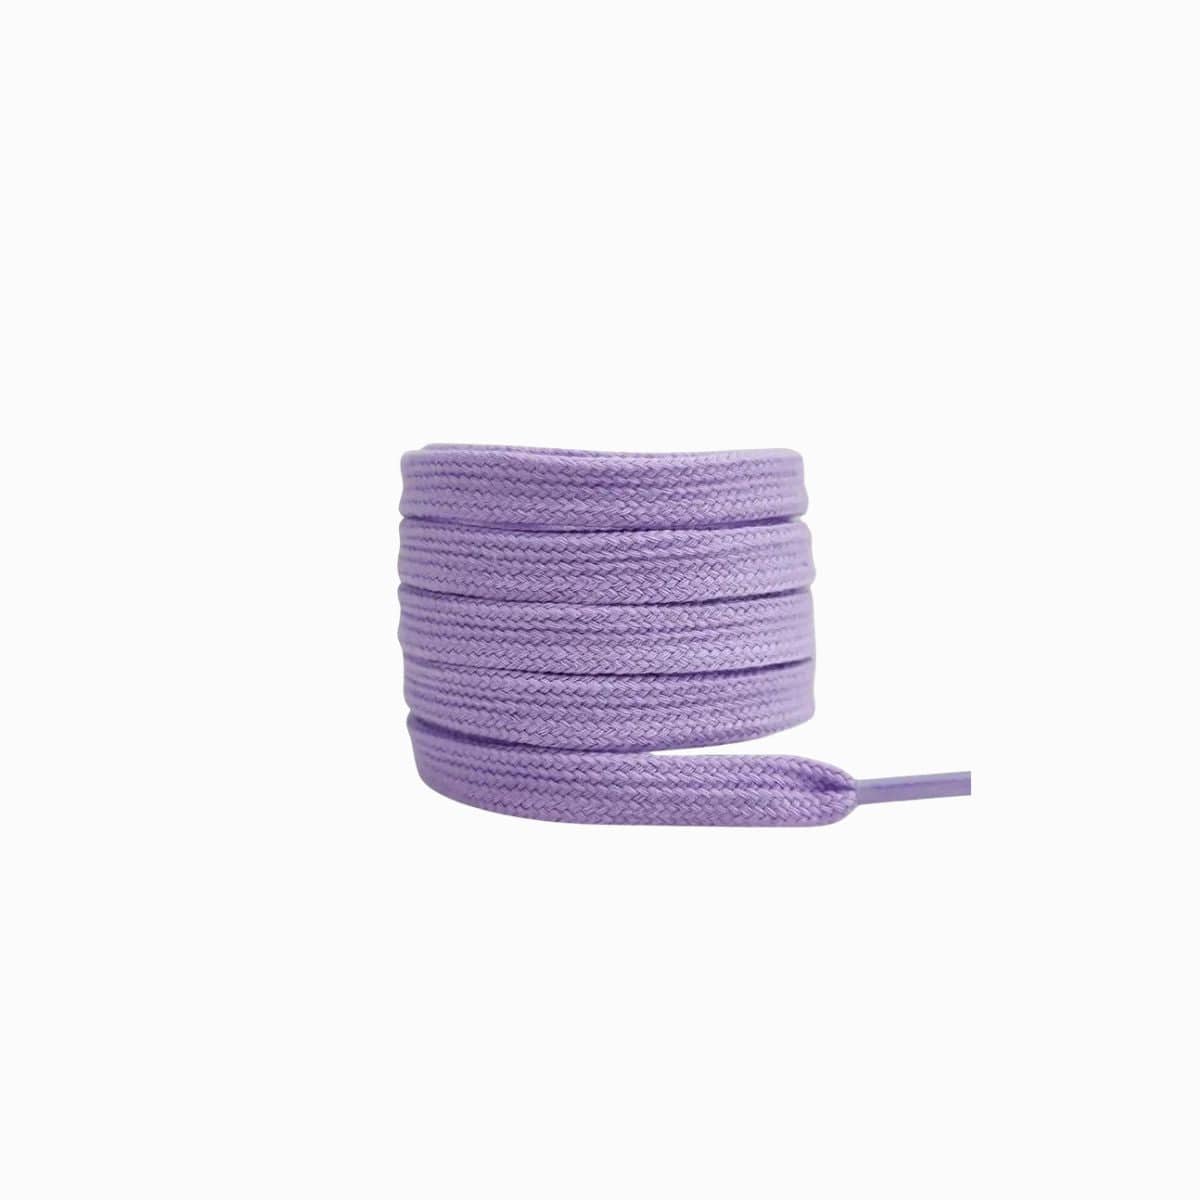 Light Purple Replacement Adidas Shoe Laces for Adidas Samba Black Sneakers by Kicks Shoelaces